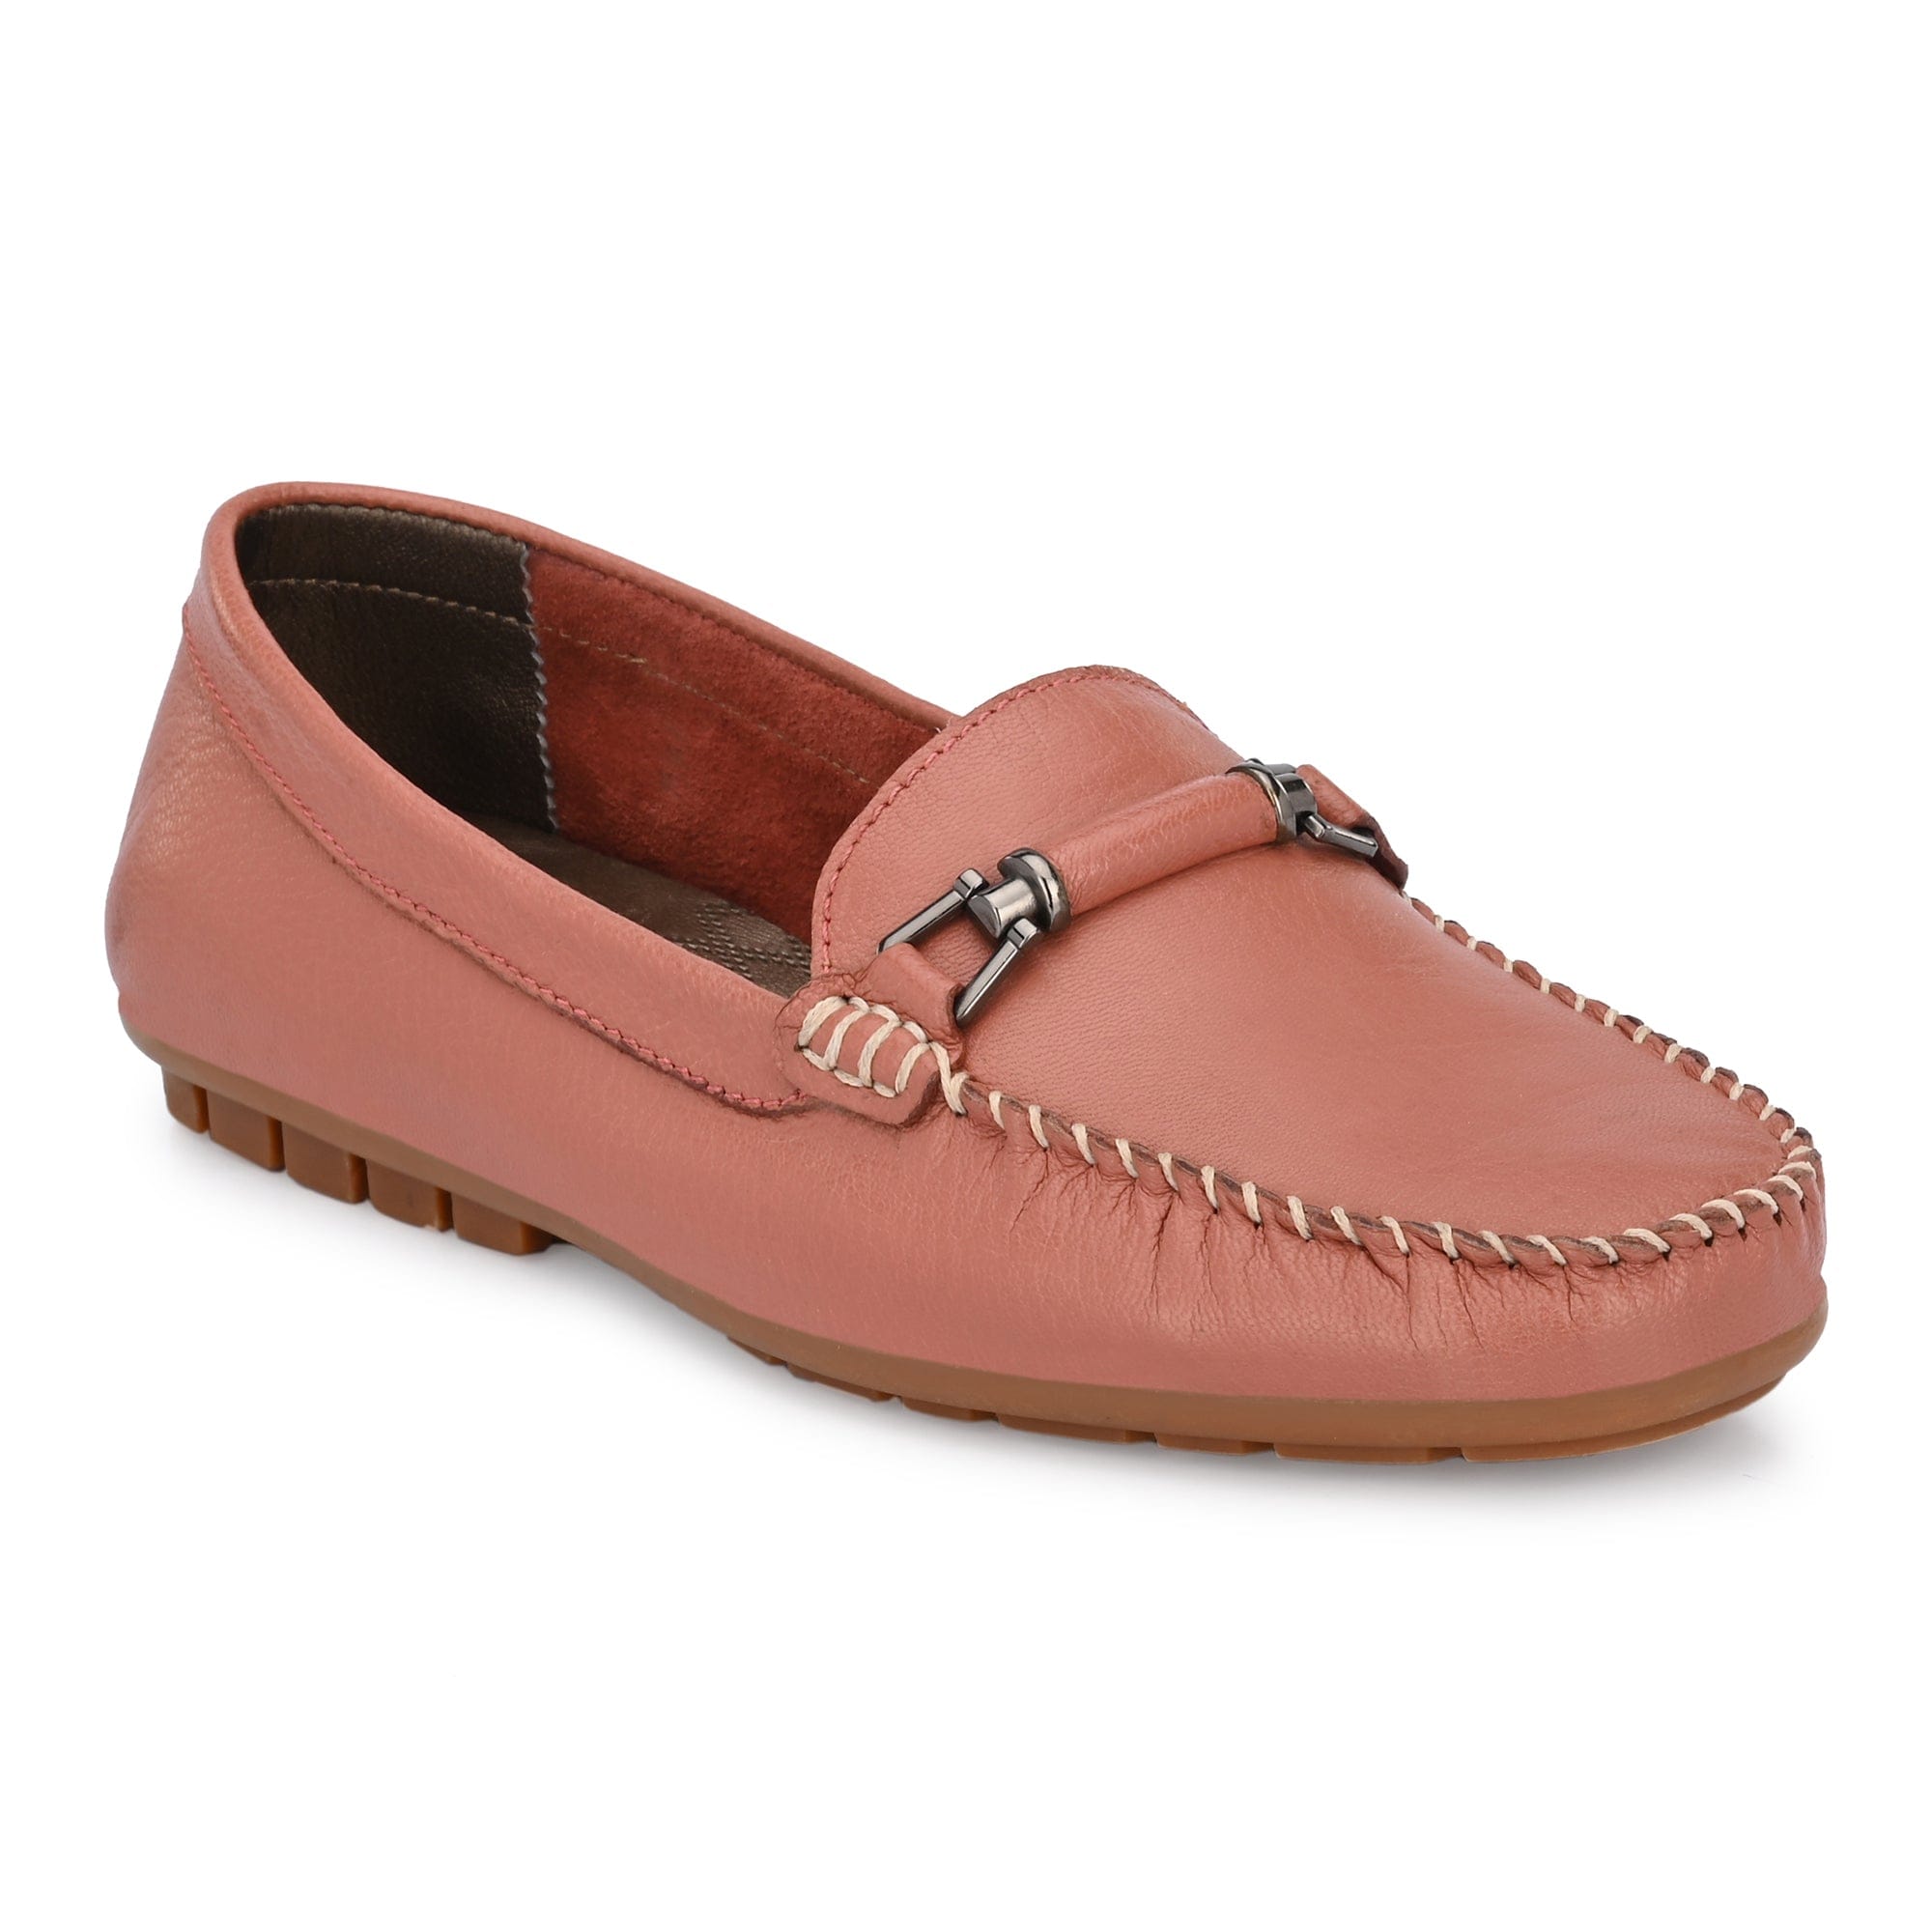 Matching buckled Casual Loafers For Women by Lady Boss egoss-shoes